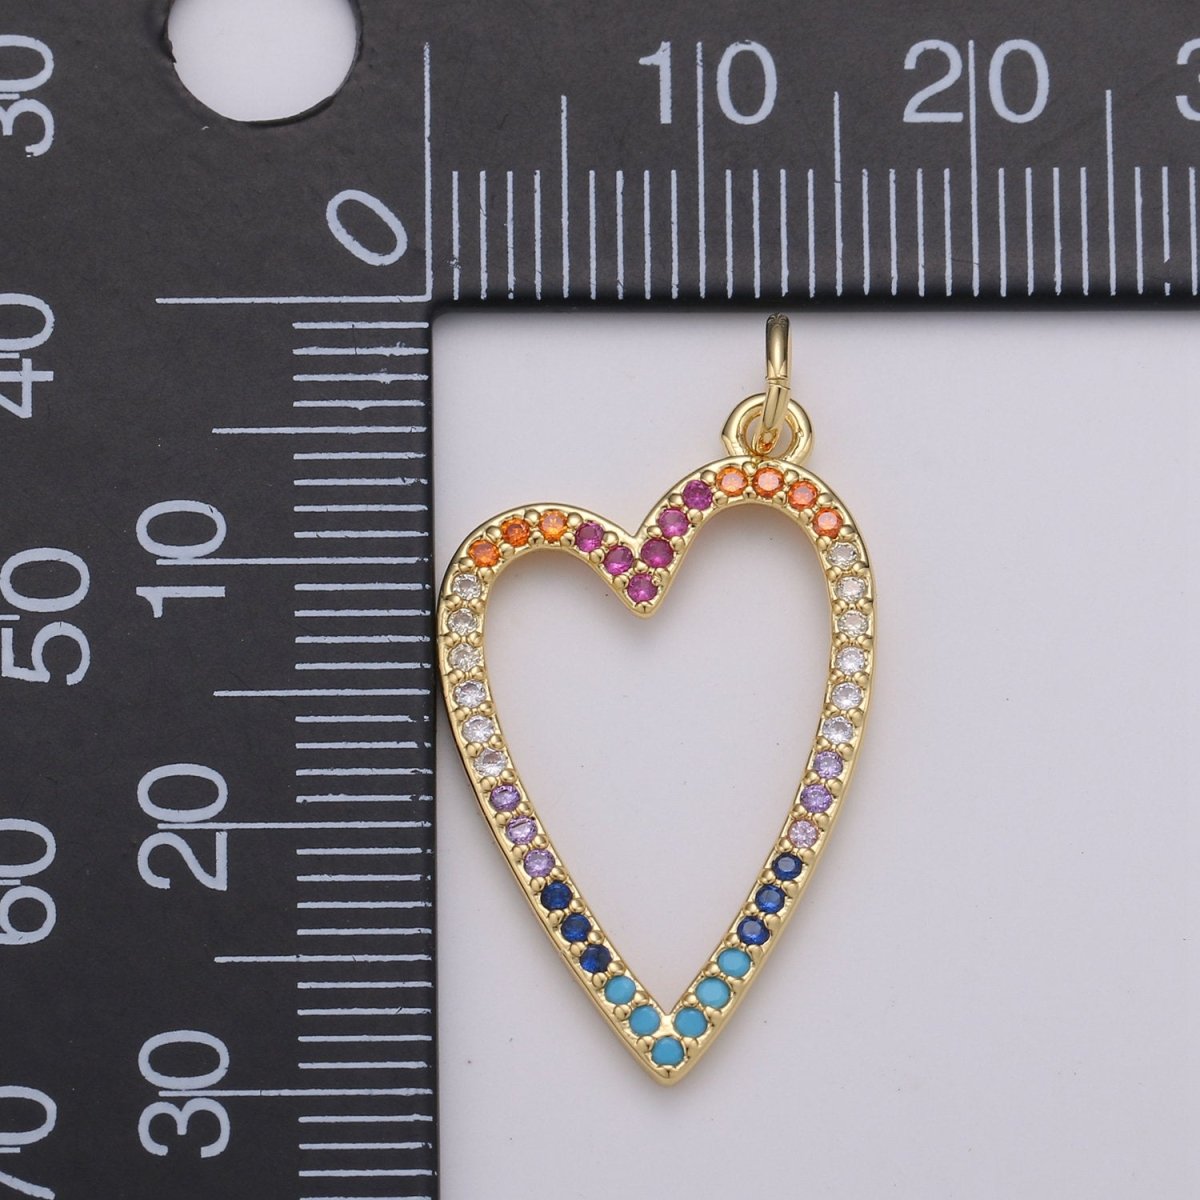 CZ Micro Pave Open Heart Pendant, Cubic Zirconia Pave Pendant, Fashion Jewelry Findings Love Necklace Charm in 14k gold filled charm D-349 - DLUXCA